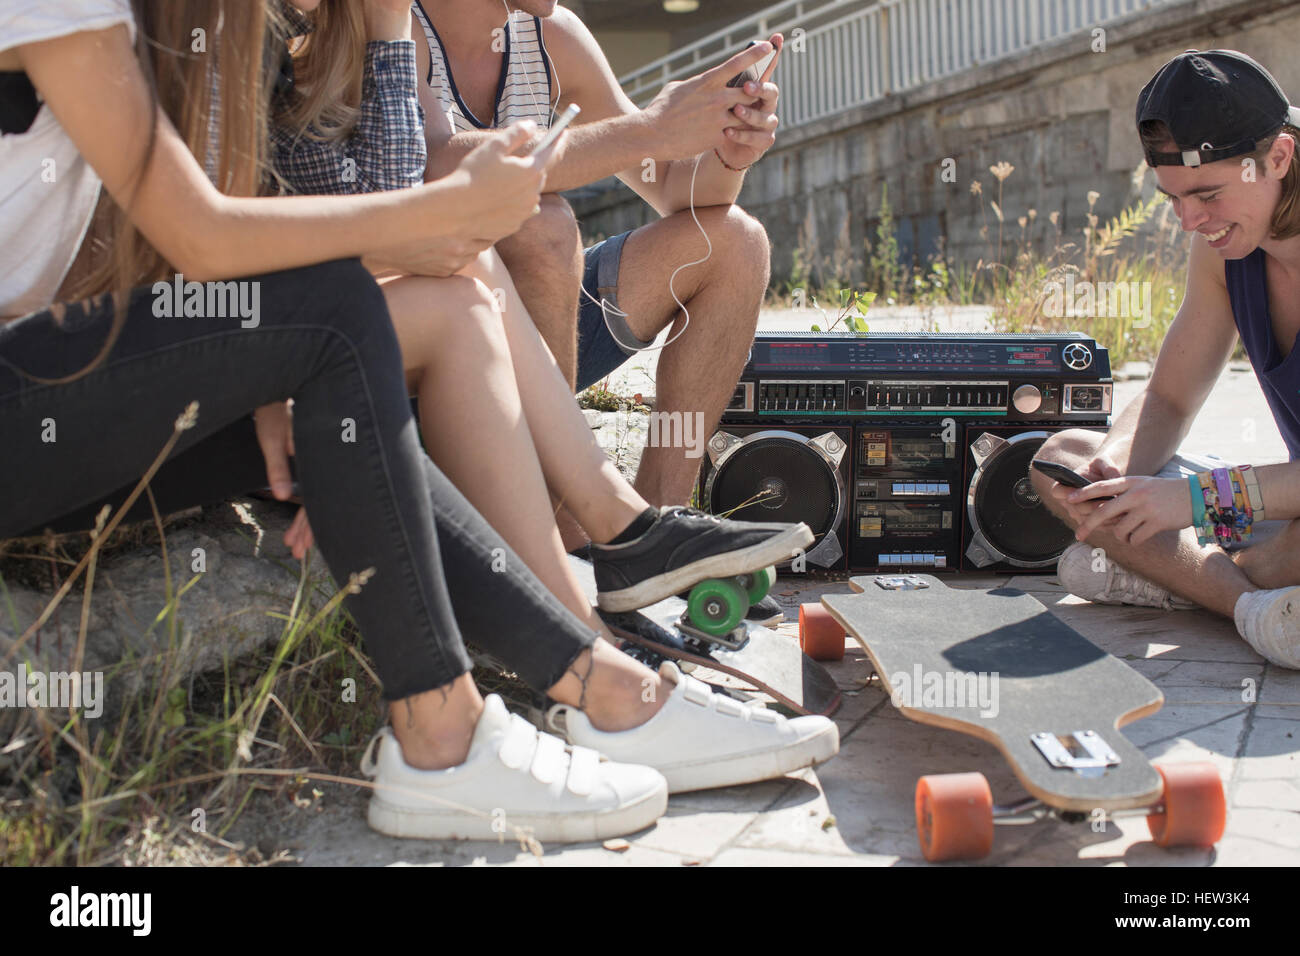 Friends social-networking on smartphones Stock Photo